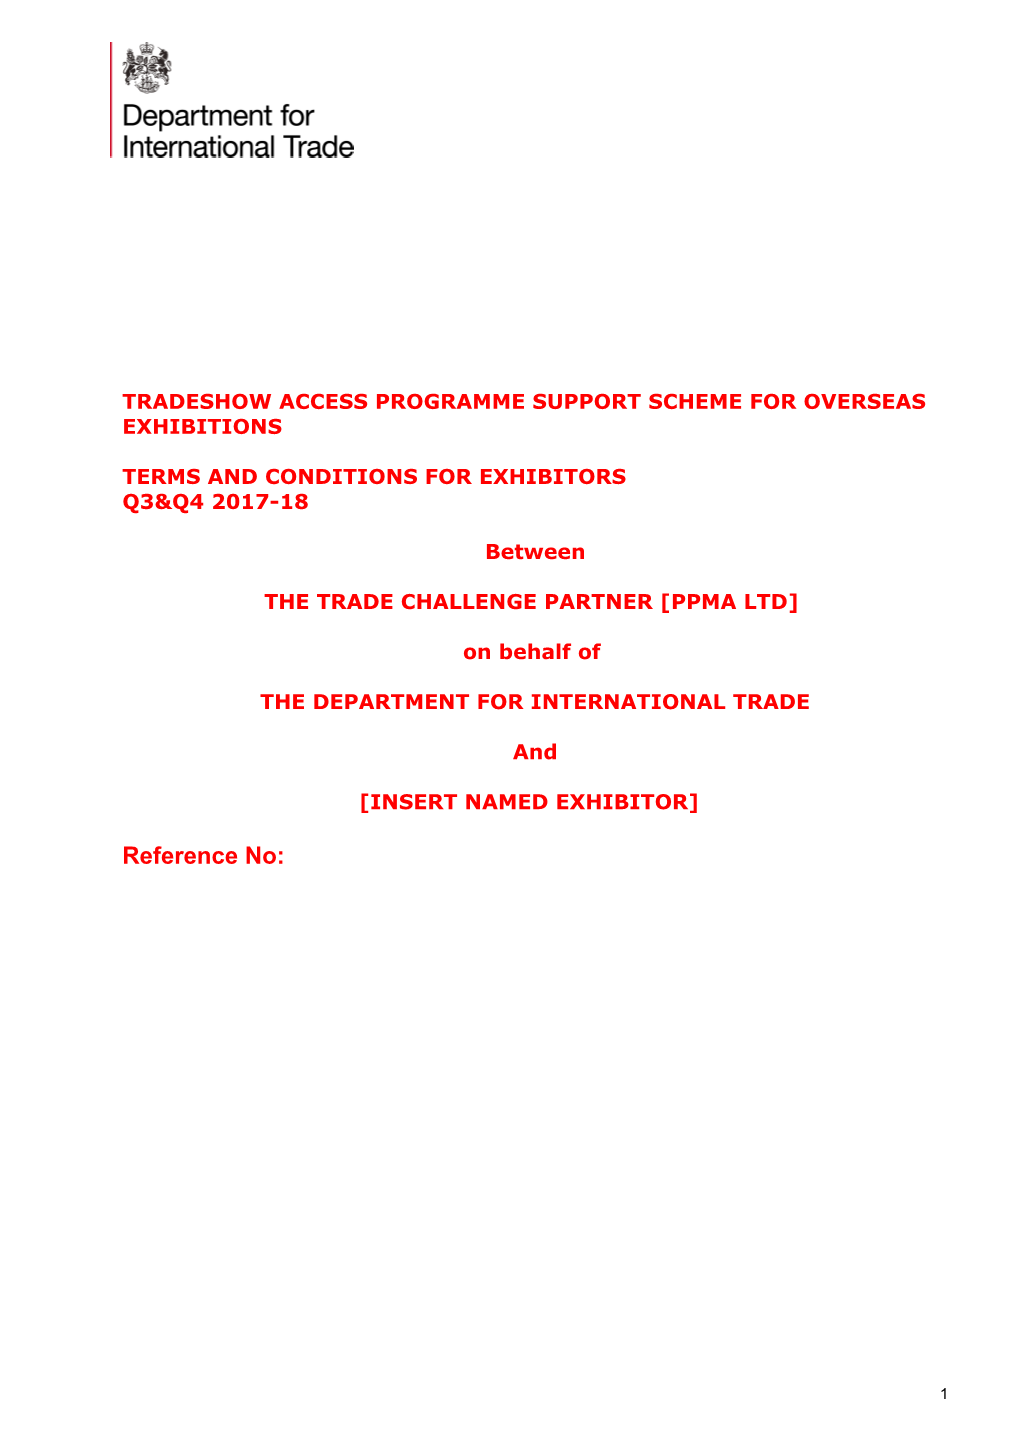 Tradeshow Access Programme Support Scheme for Overseas Exhibitions